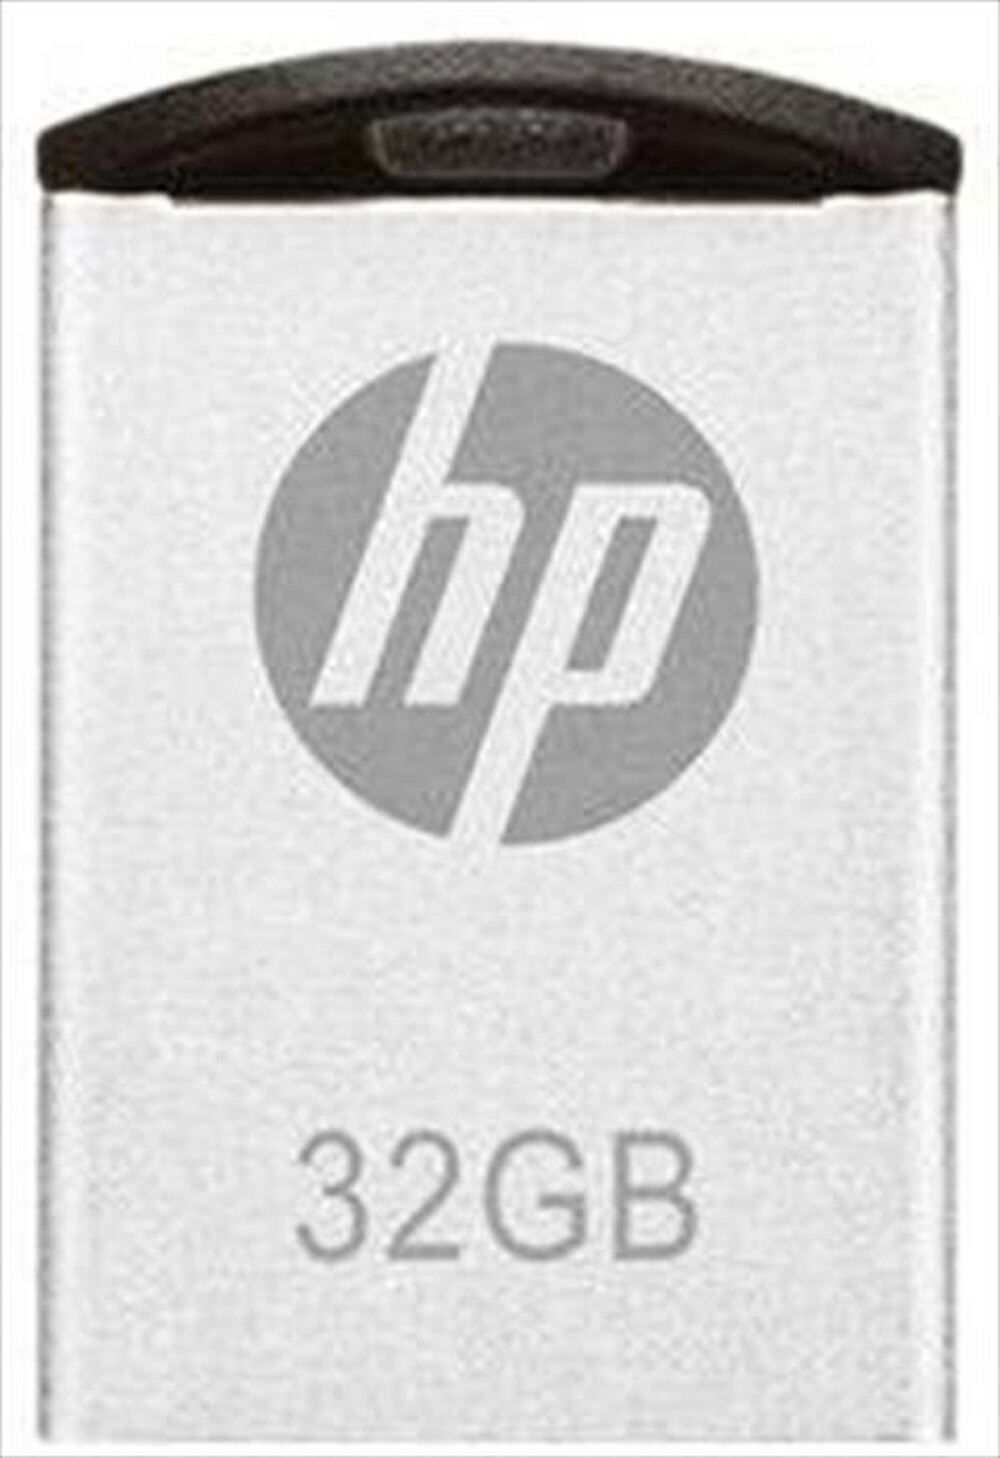 "HP - IPNHPPHPFD222W"